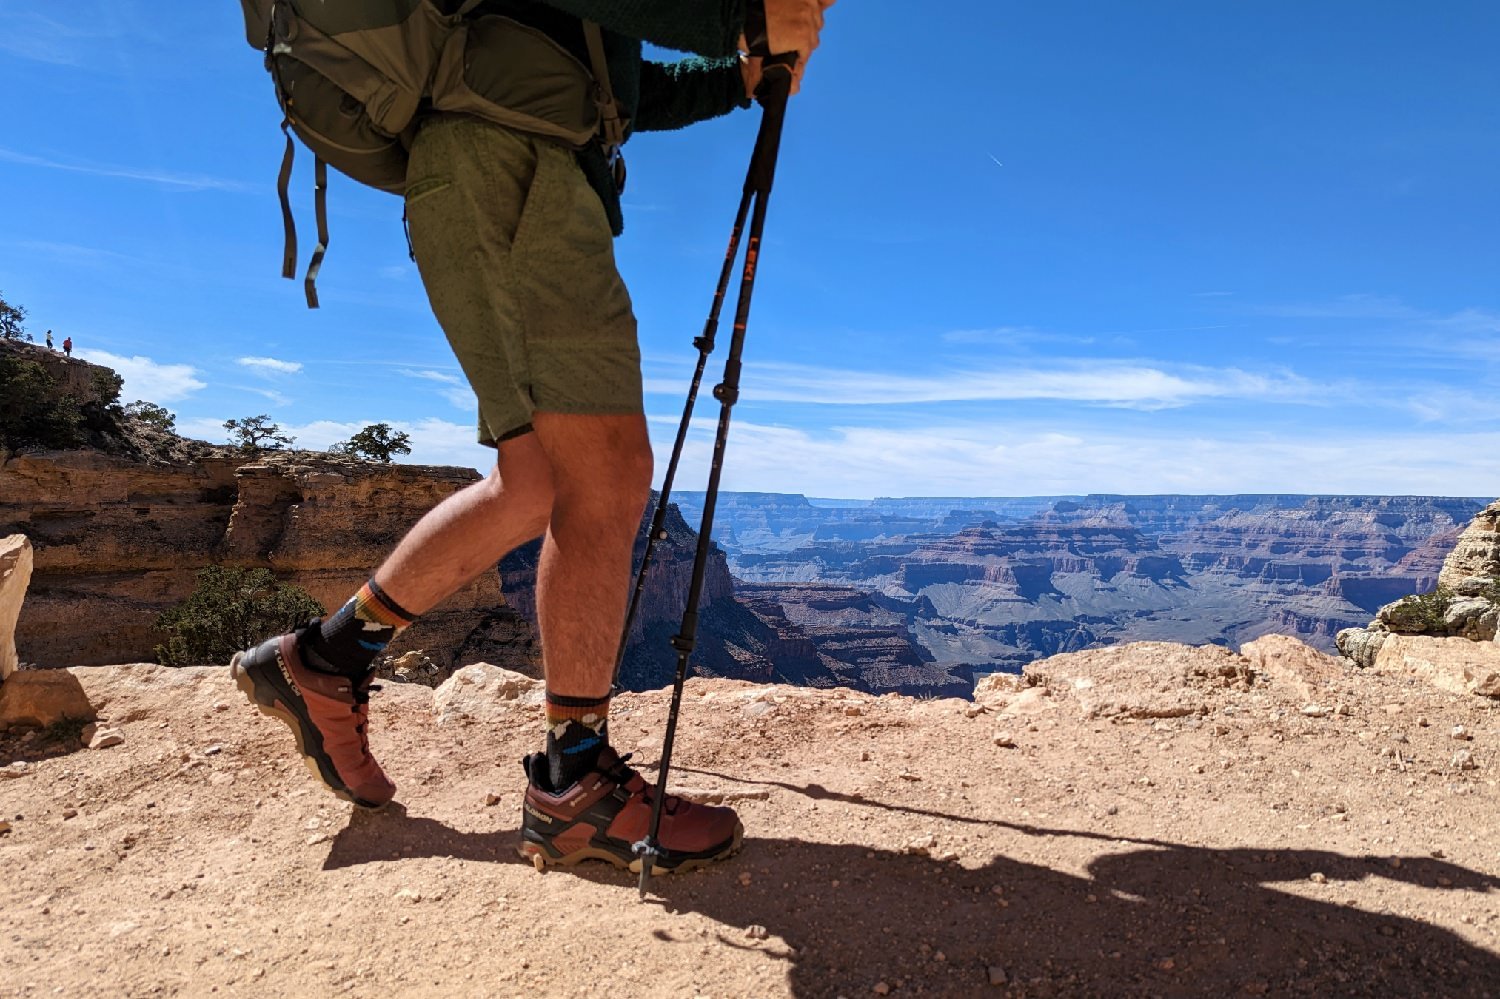 A torso down view of a hiker hiking on a trail in the Grand Canyon